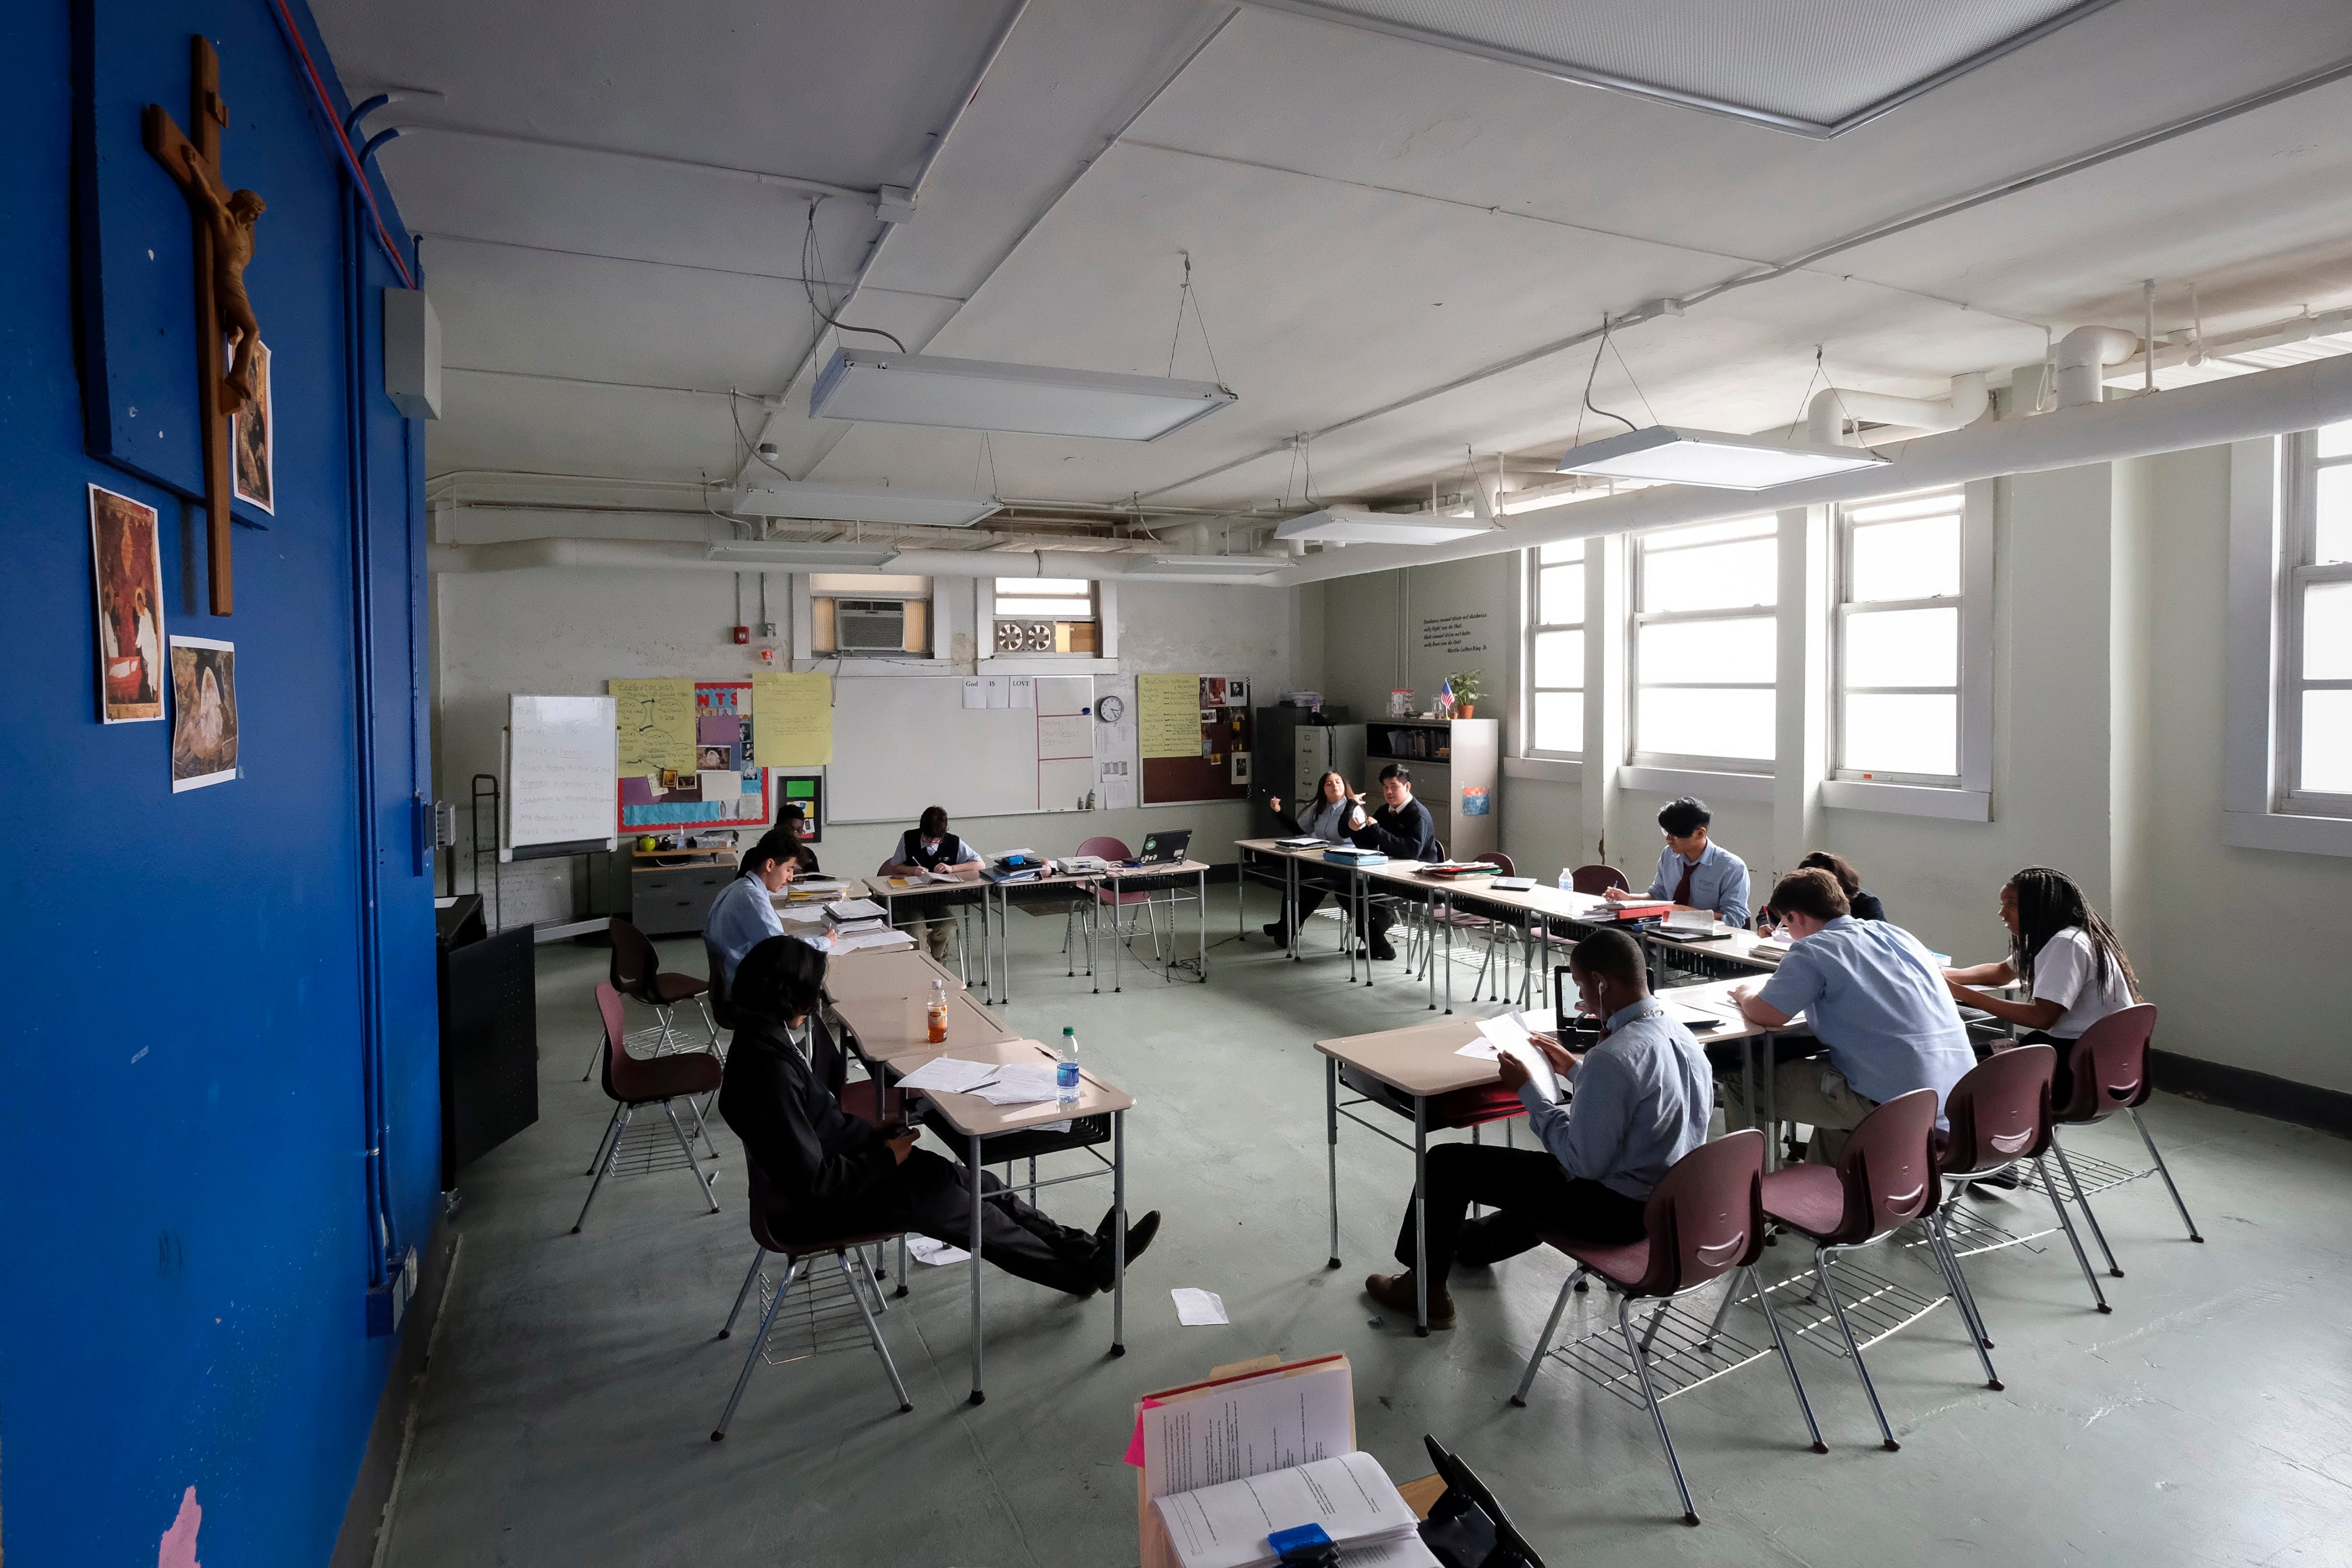 11 high school students look at papers and books while sitting at desks arranged in a large rectangle in an Indiana classroom. Pictures are pinned on a royal blue wall, and more pictures and posters are pinned to bulletin board on a far wall.